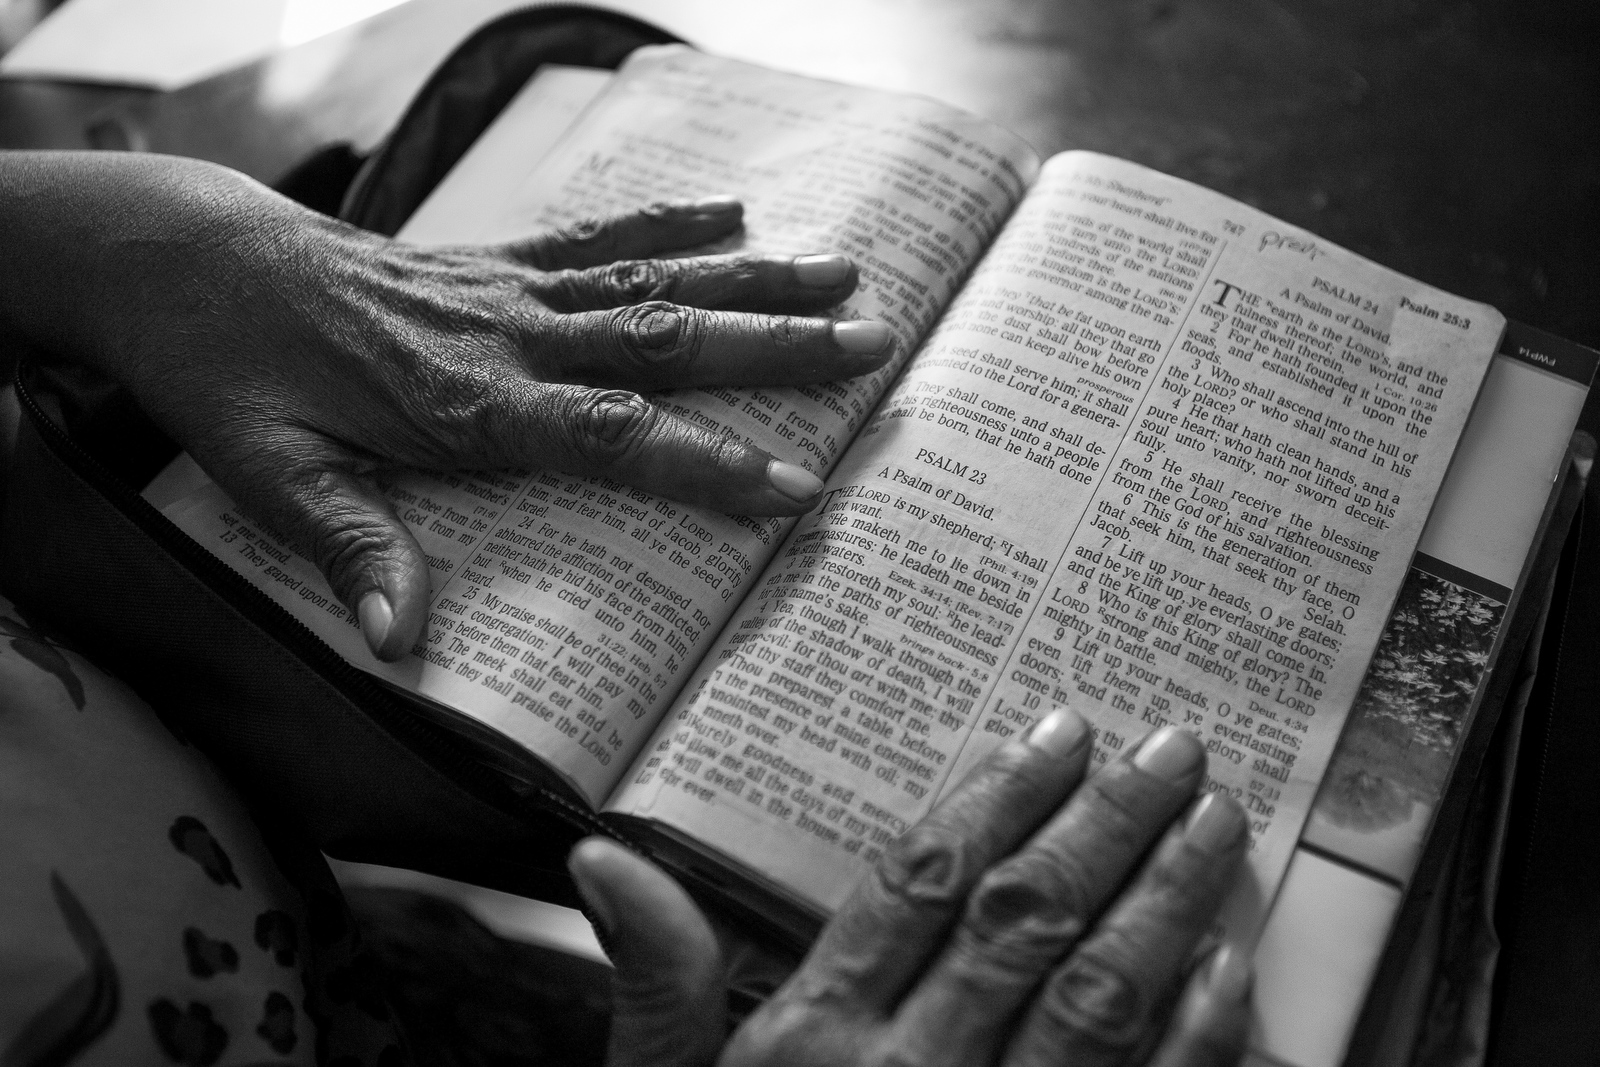  Imogene Davis opens the Bible to her favorite Psalm at her house in Belle Glade. Imogene's previous home caught fire and the family lost everything. Imogene says that her faith helps to keep her going, but sometimes she gets overwhelmed and can't st